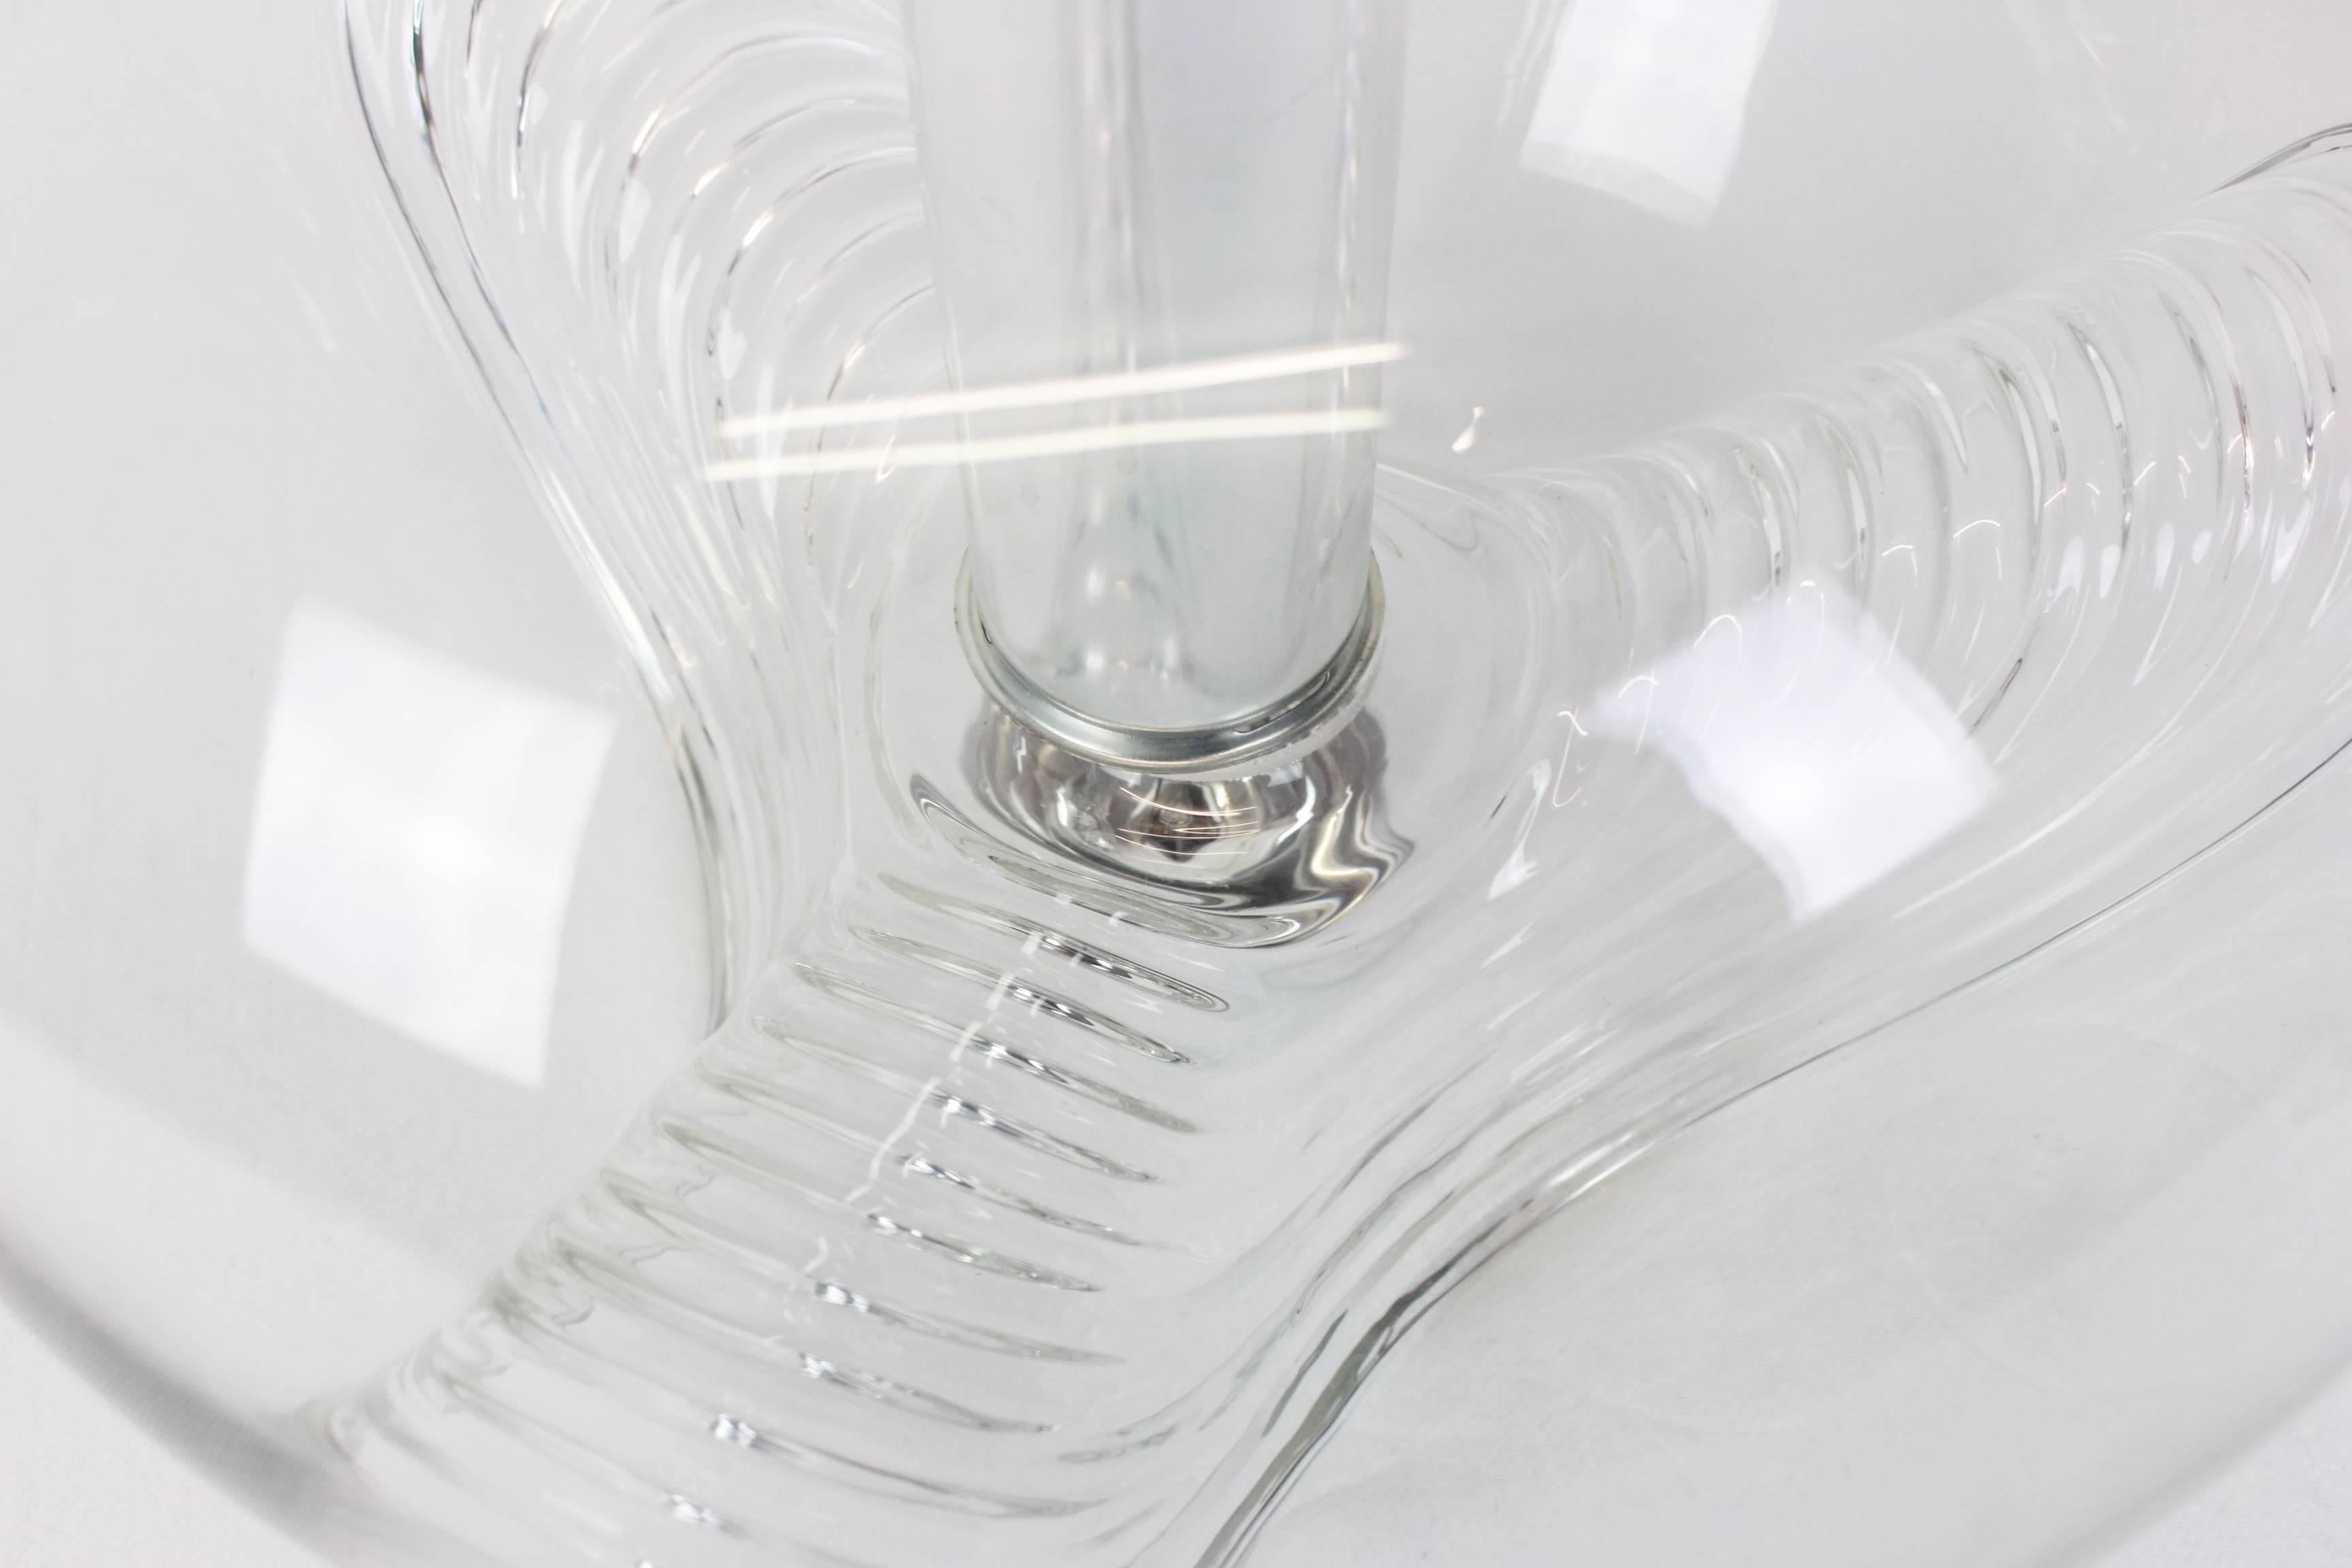 A special round biomorphic clear glass pendant designed by Koch & Lowy for Peill & Putzler, manufactured in Germany, circa the 1970s.

High quality and in very good condition. Cleaned, well-wired and ready to use. 

The fixture requires 1 x E27